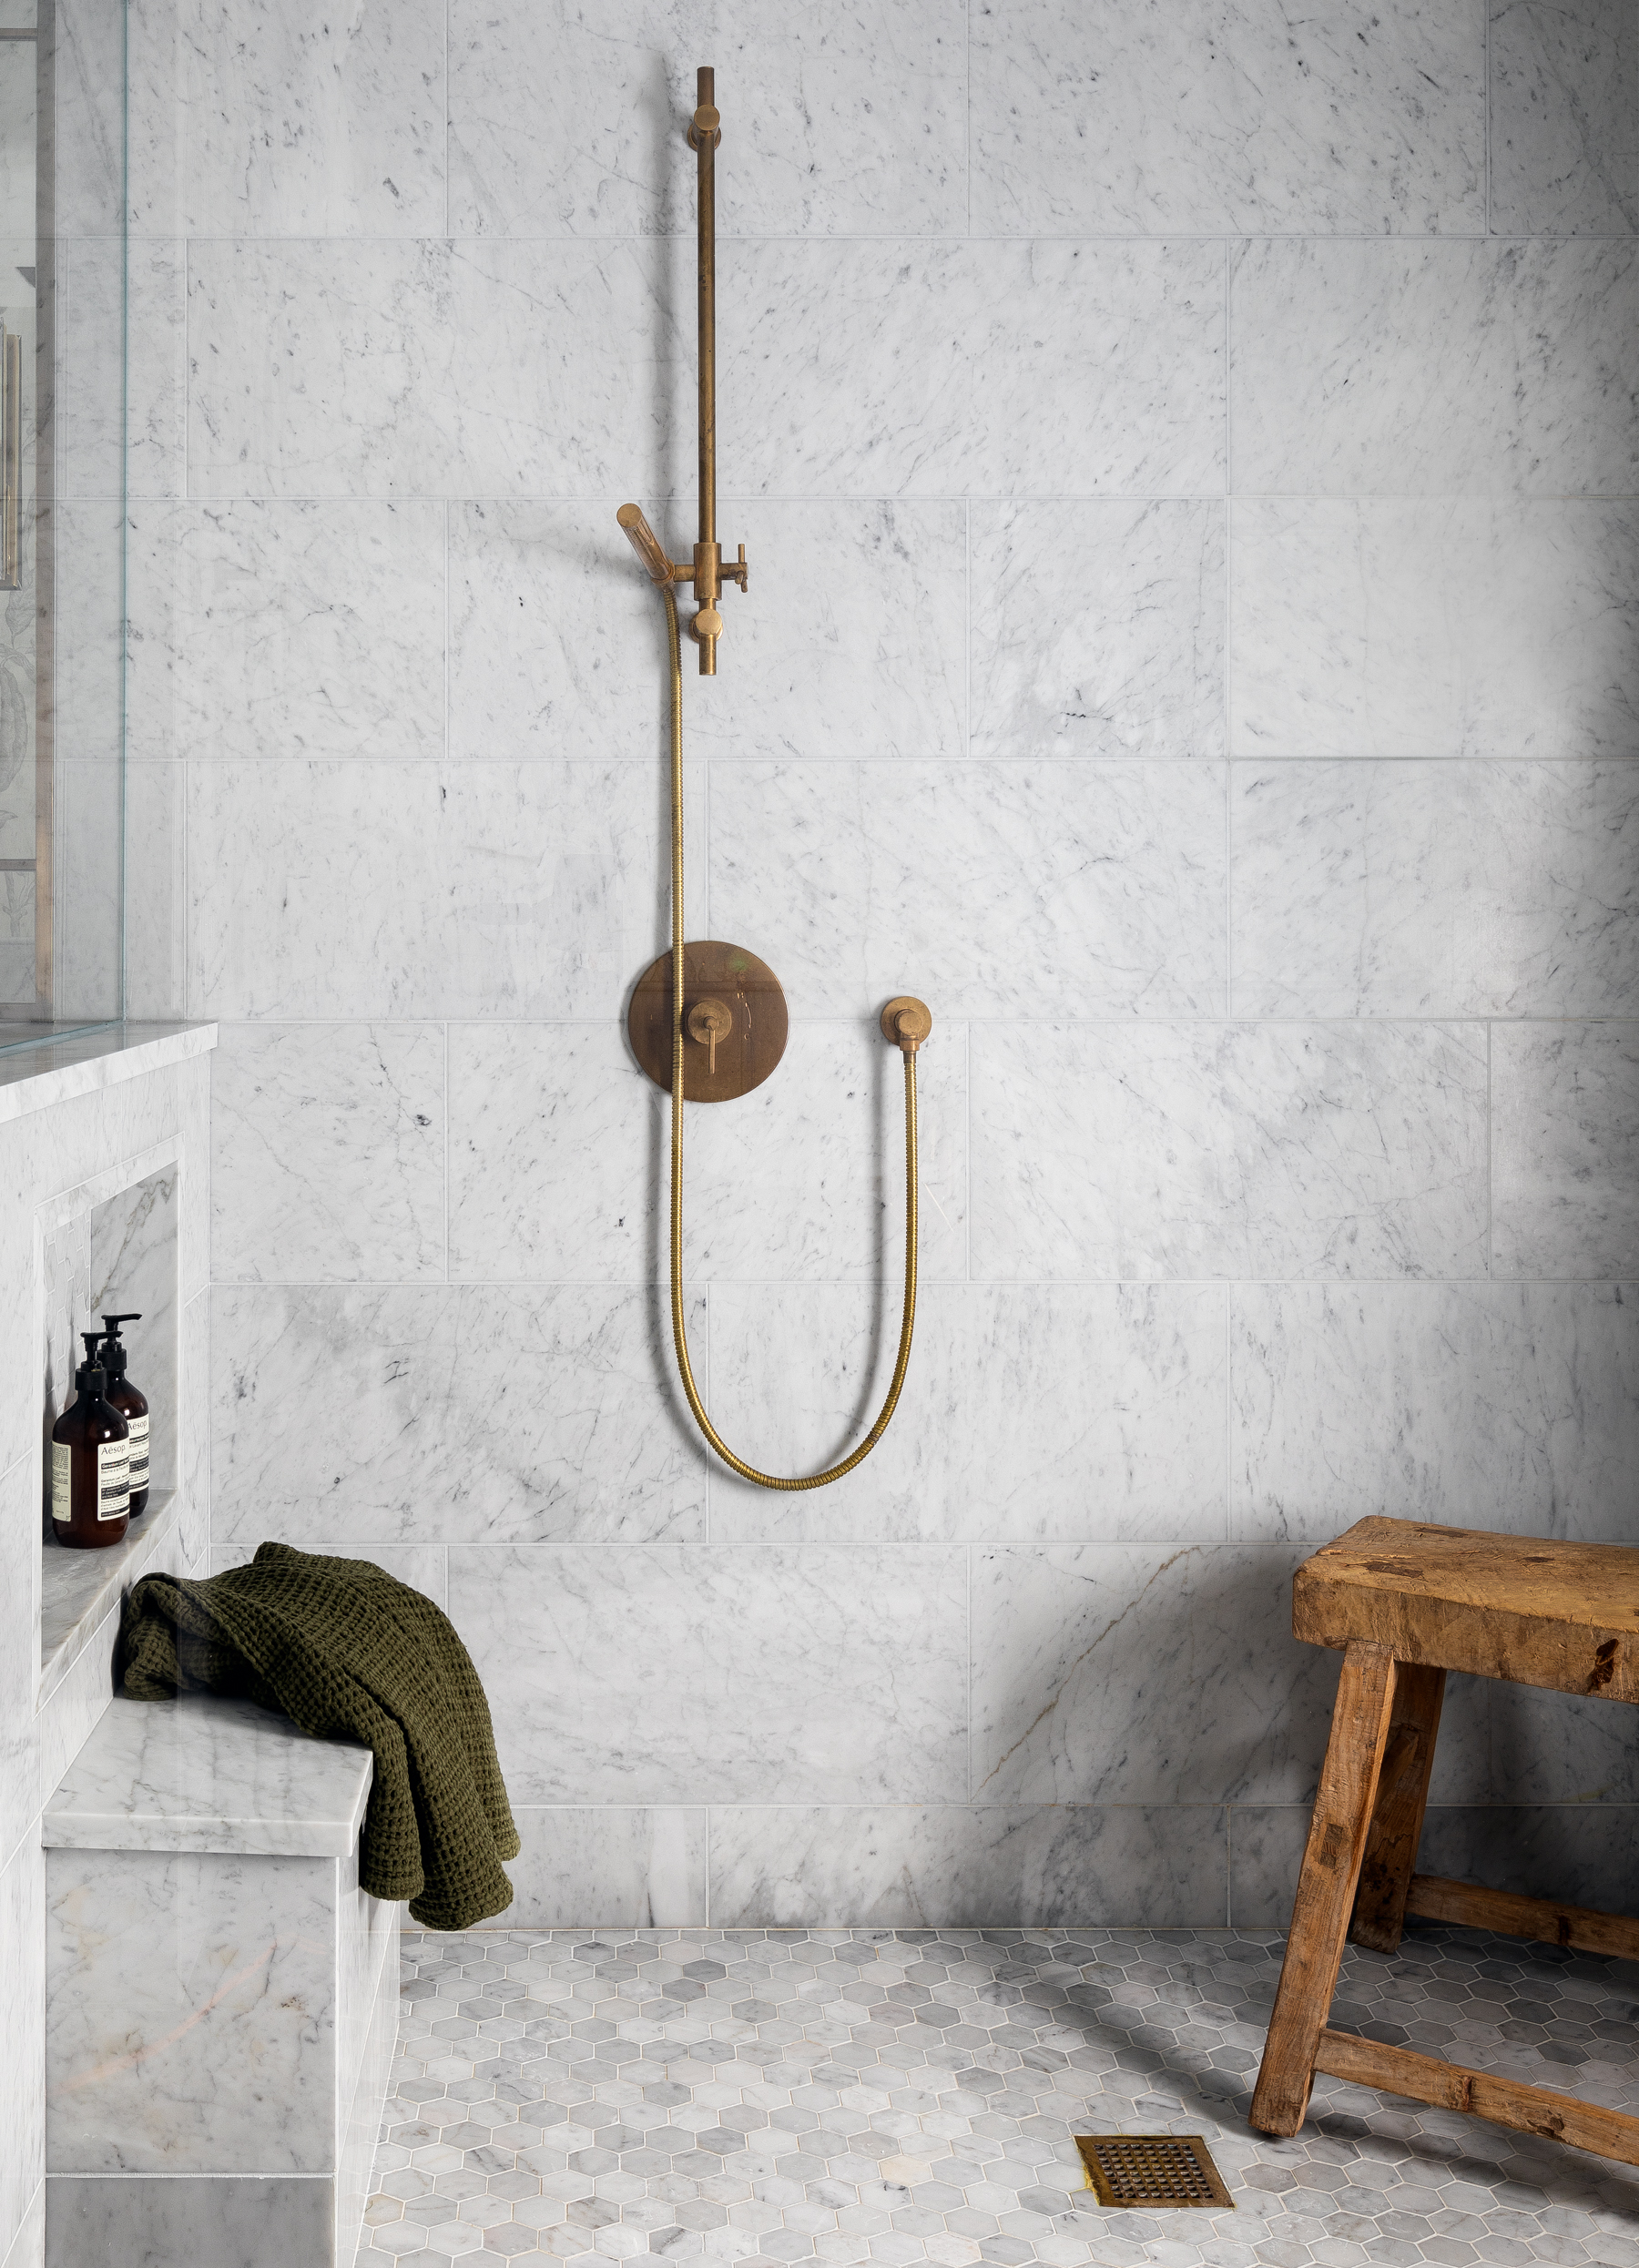 Marble and unlacquered brass in this bathroom create a classic feel. The brass will patina over time, adding to its timeless aesthetic.